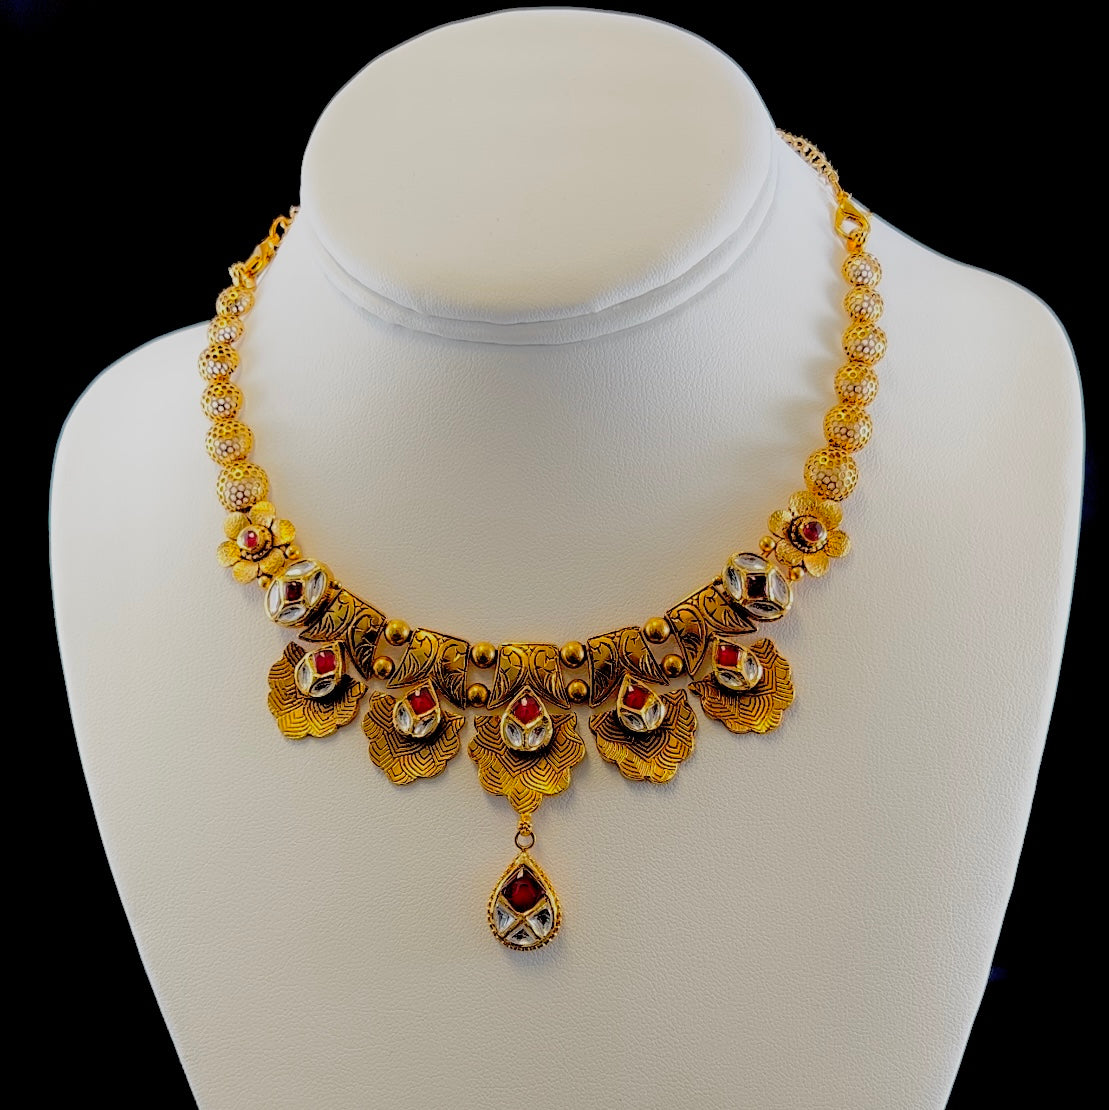 Antique Gold Necklace Set with Leaf-Like Central Pendant and Earrings